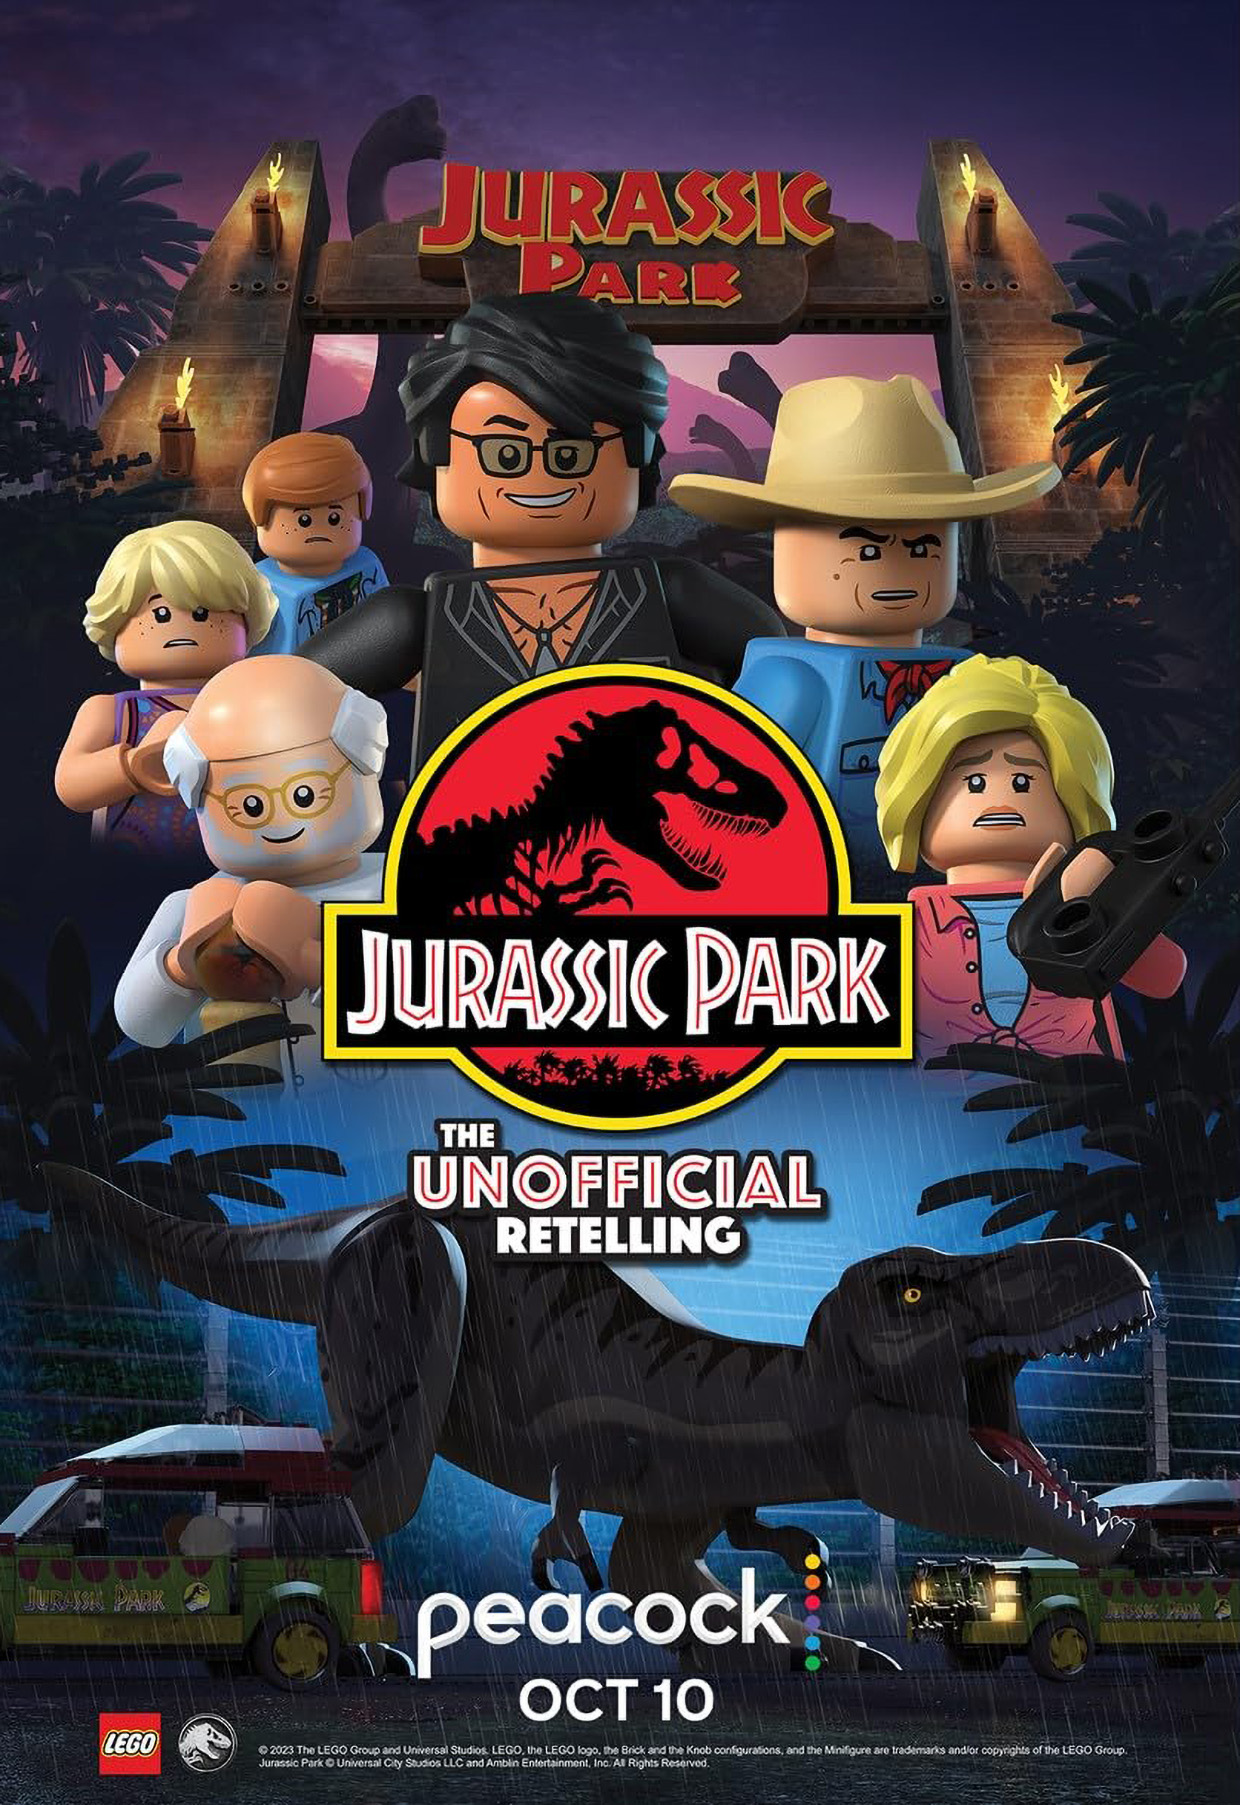 Dr. Ian Malcolm Is Back for "LEGO Jurassic Park The Unofficial Retelling"